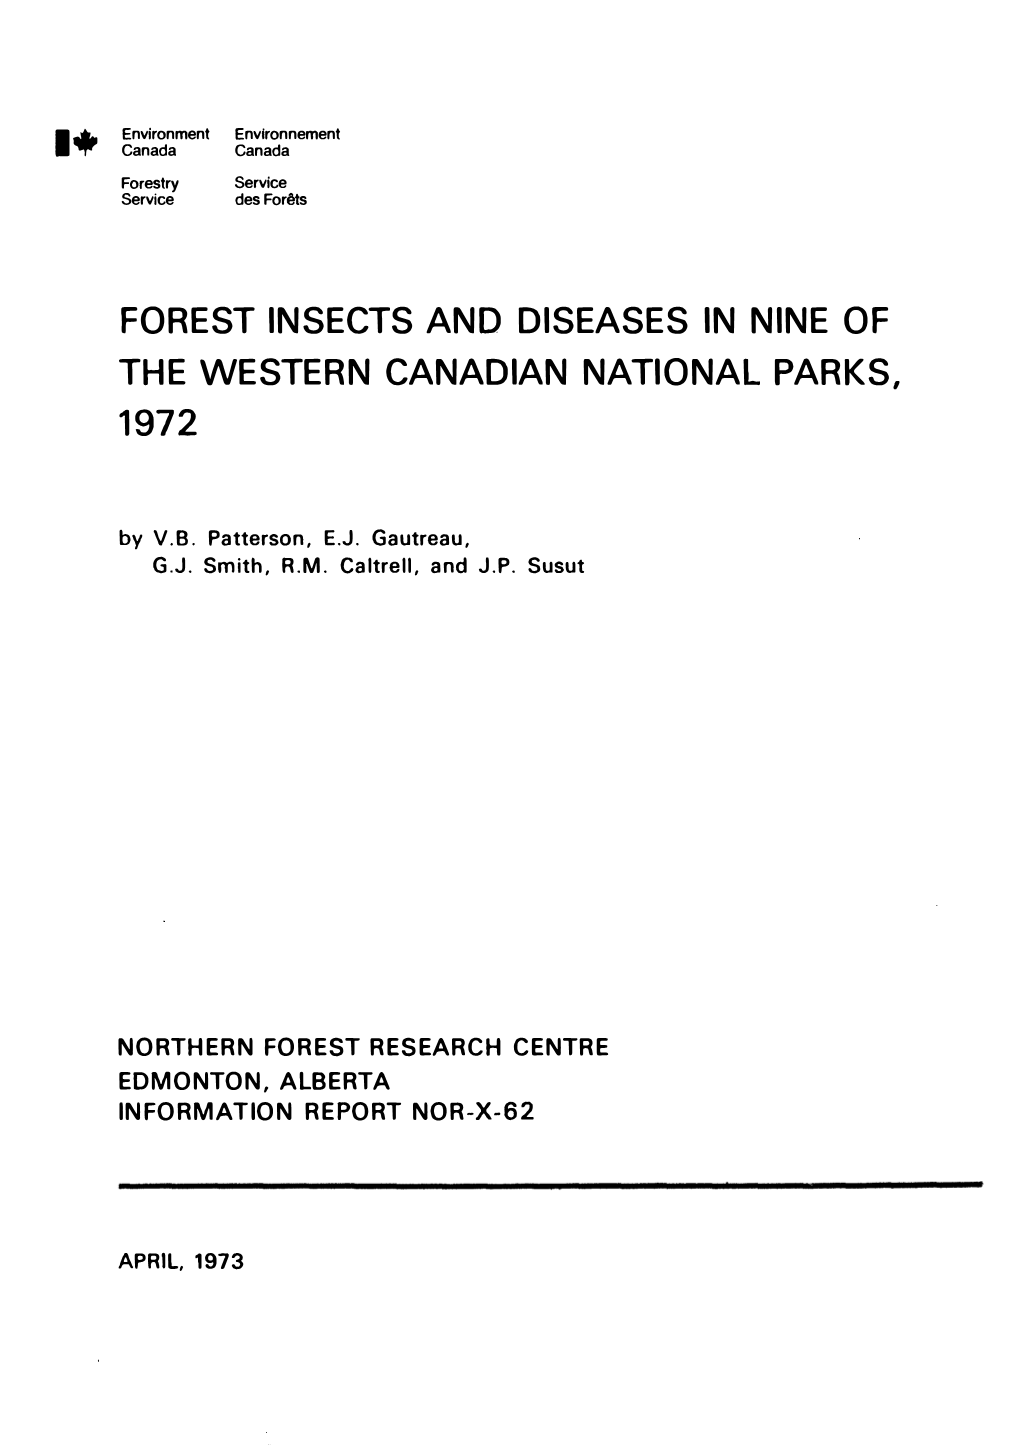 Forest Insects and Diseases in Nine of the Western Canadian National Parks, 1972